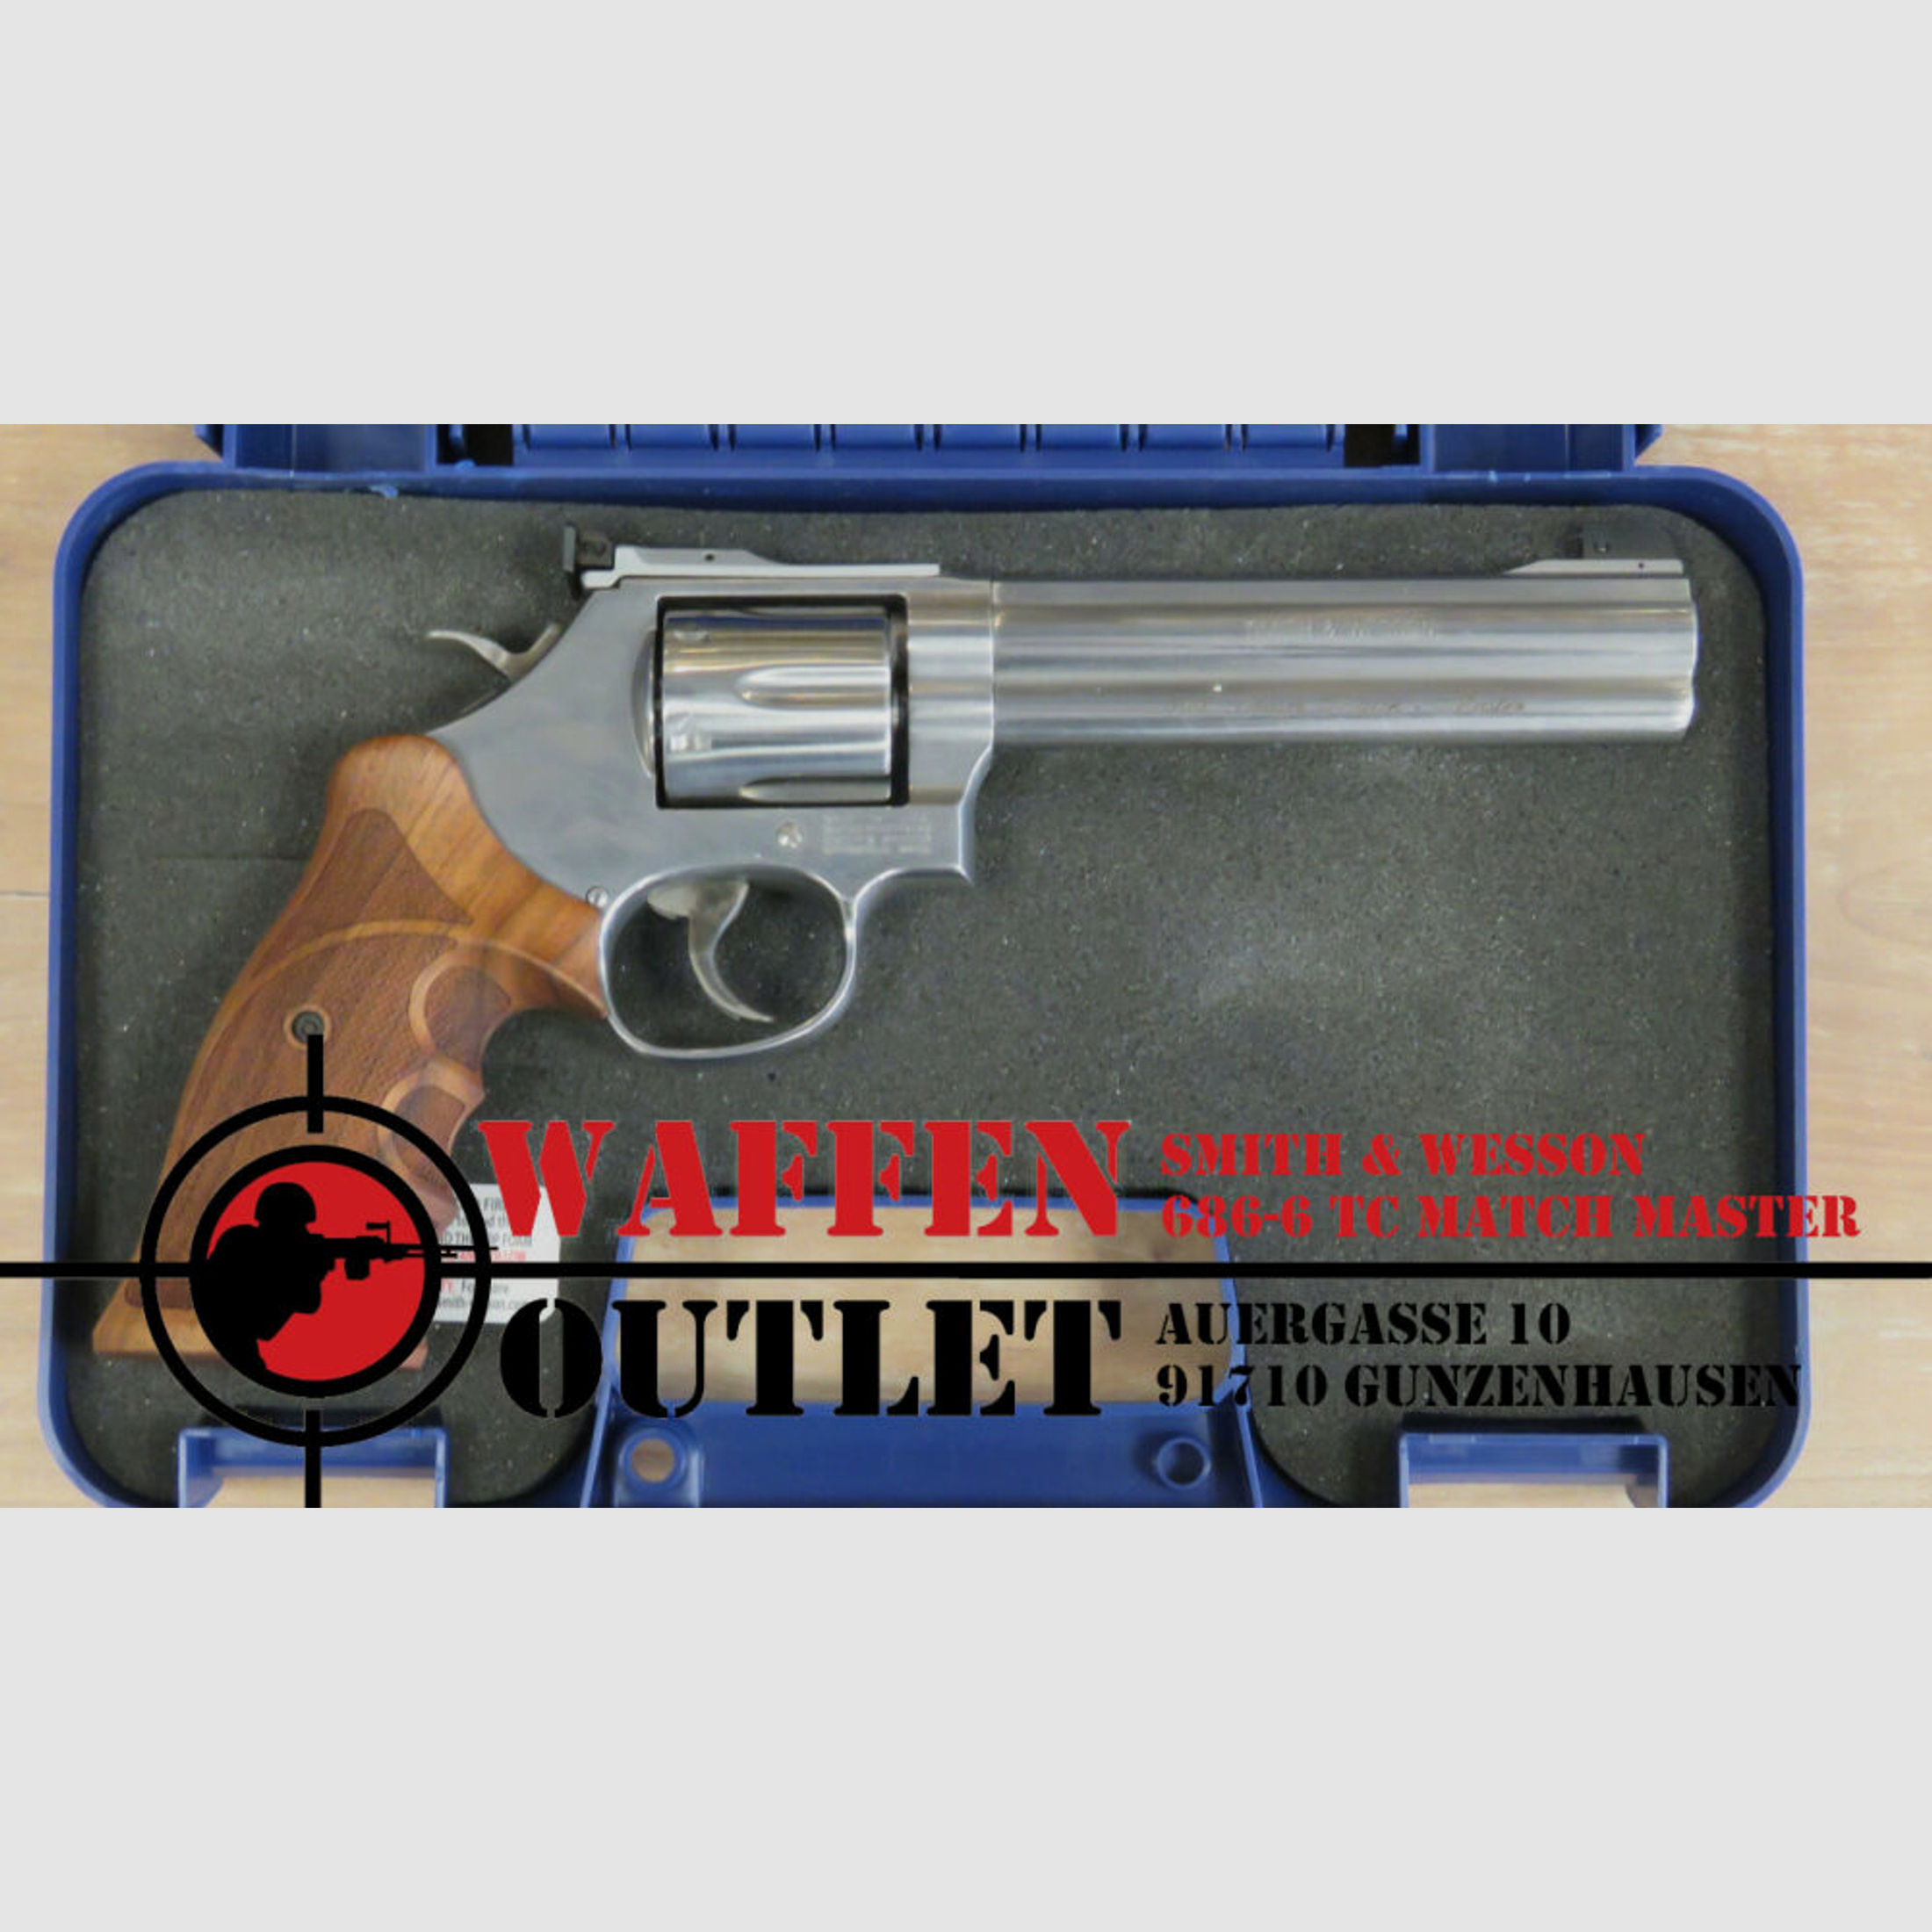 Smith & Wesson	 Model 686-6 Target Champion Deluxe Match Master